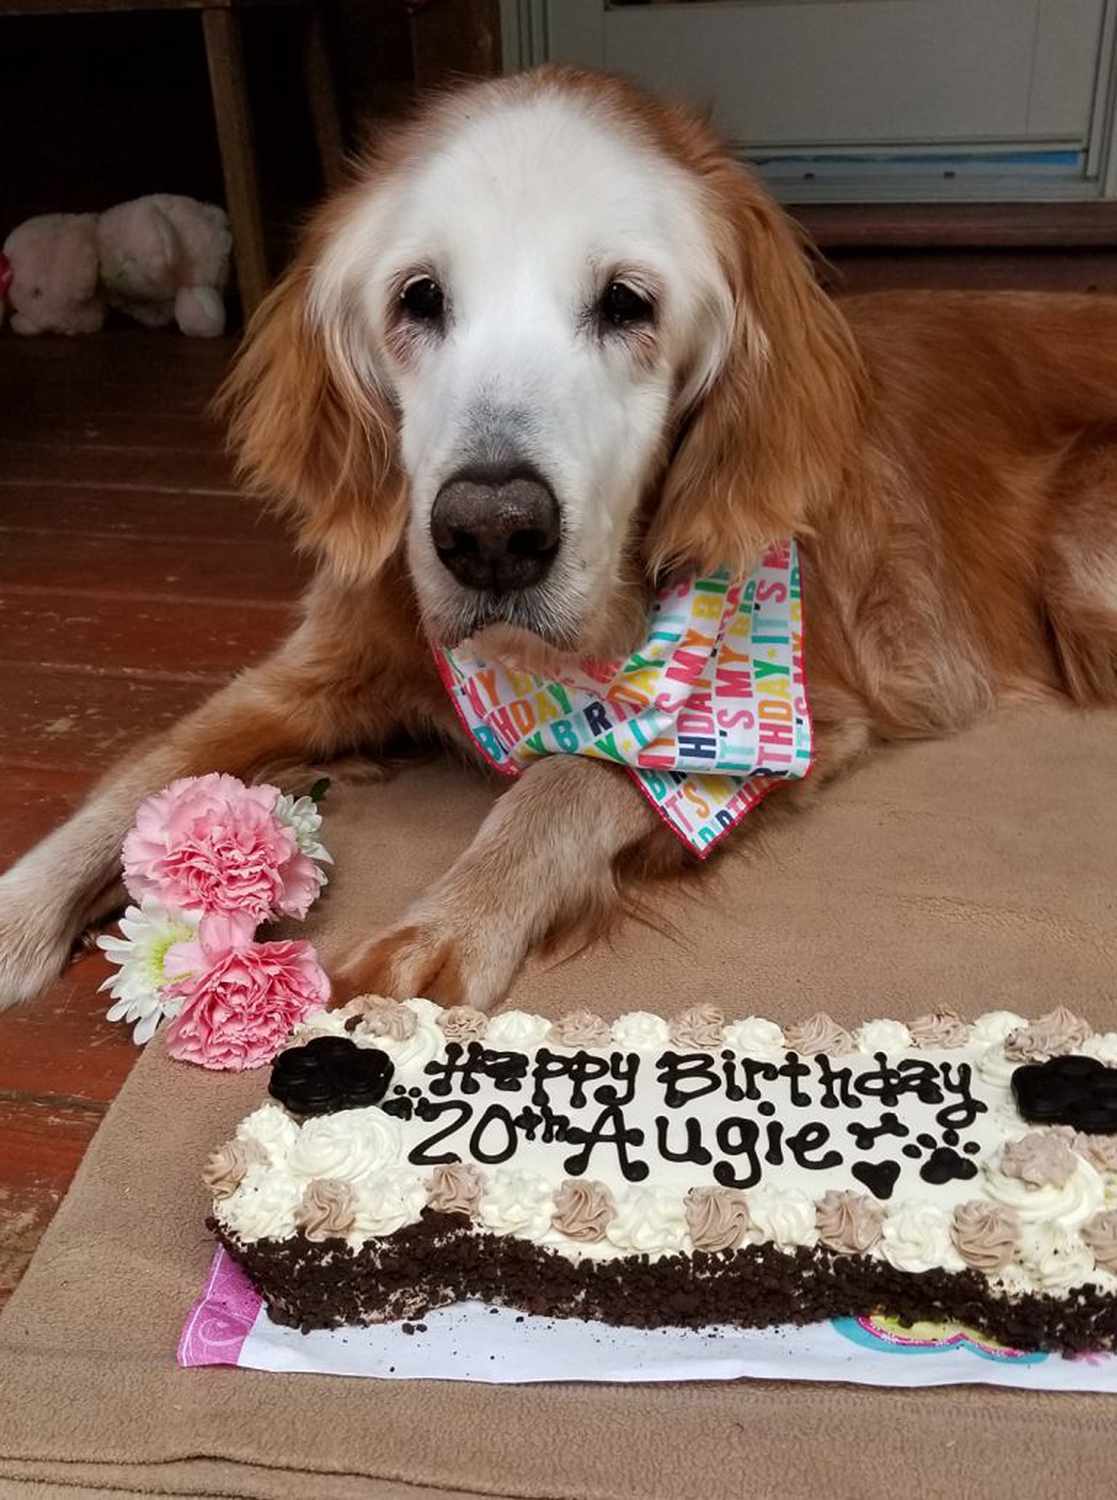 20-Year-Old Dog Becomes Oldest Golden Retriever in History | PEOPLE.com